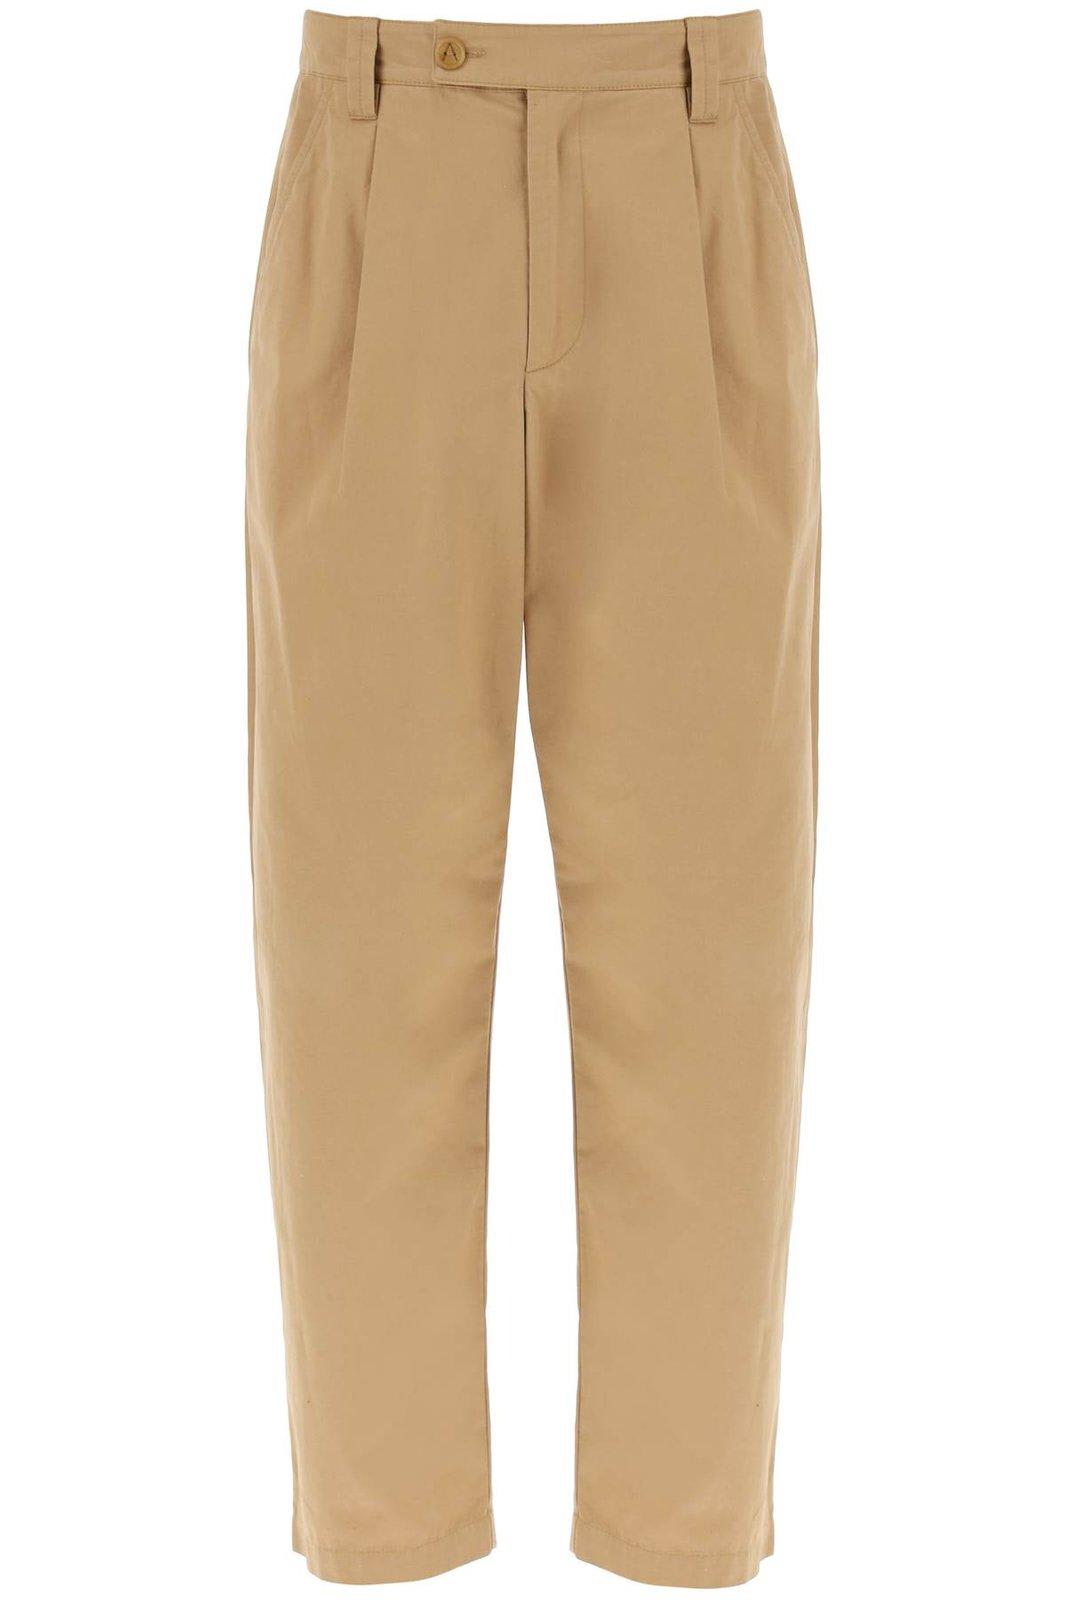 Shop Apc Straight Leg Tailored Trousers In Beige